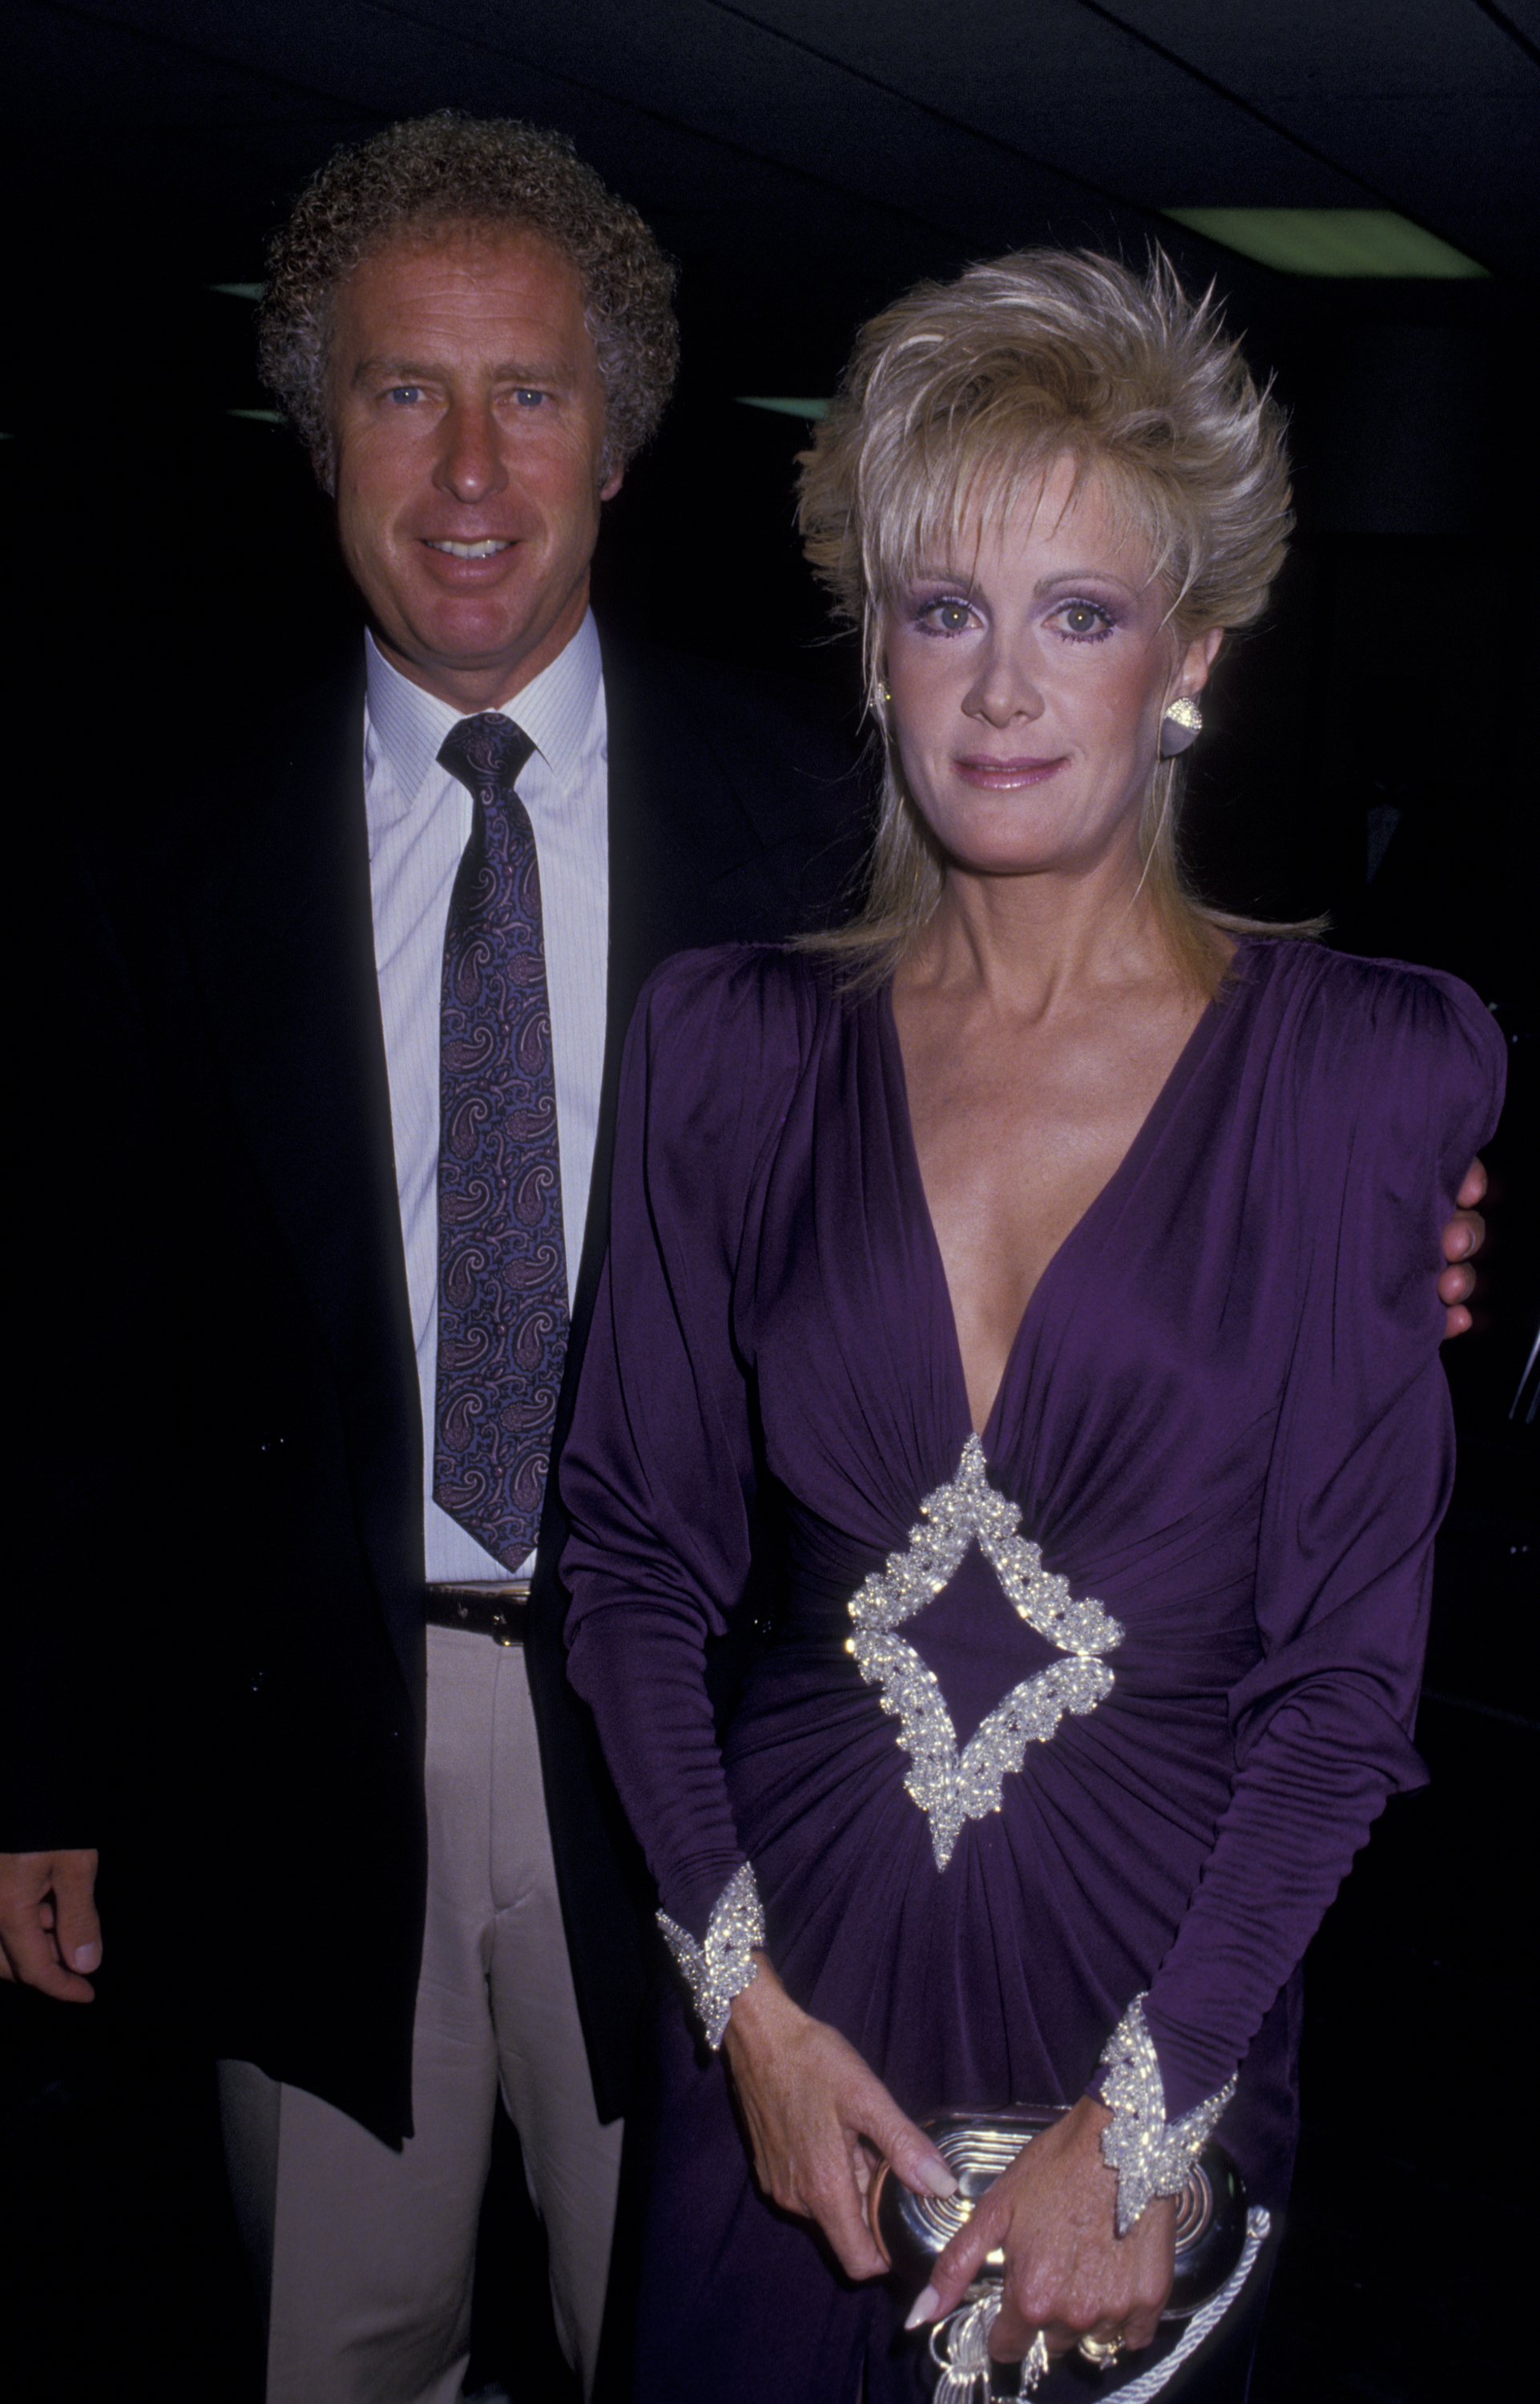 Joan Van Ark and John Marshall attend CBS TV Affiliates Party on May 20, 1987 at the Century Plaza Hotel in Century City, California. | Source: Getty Images